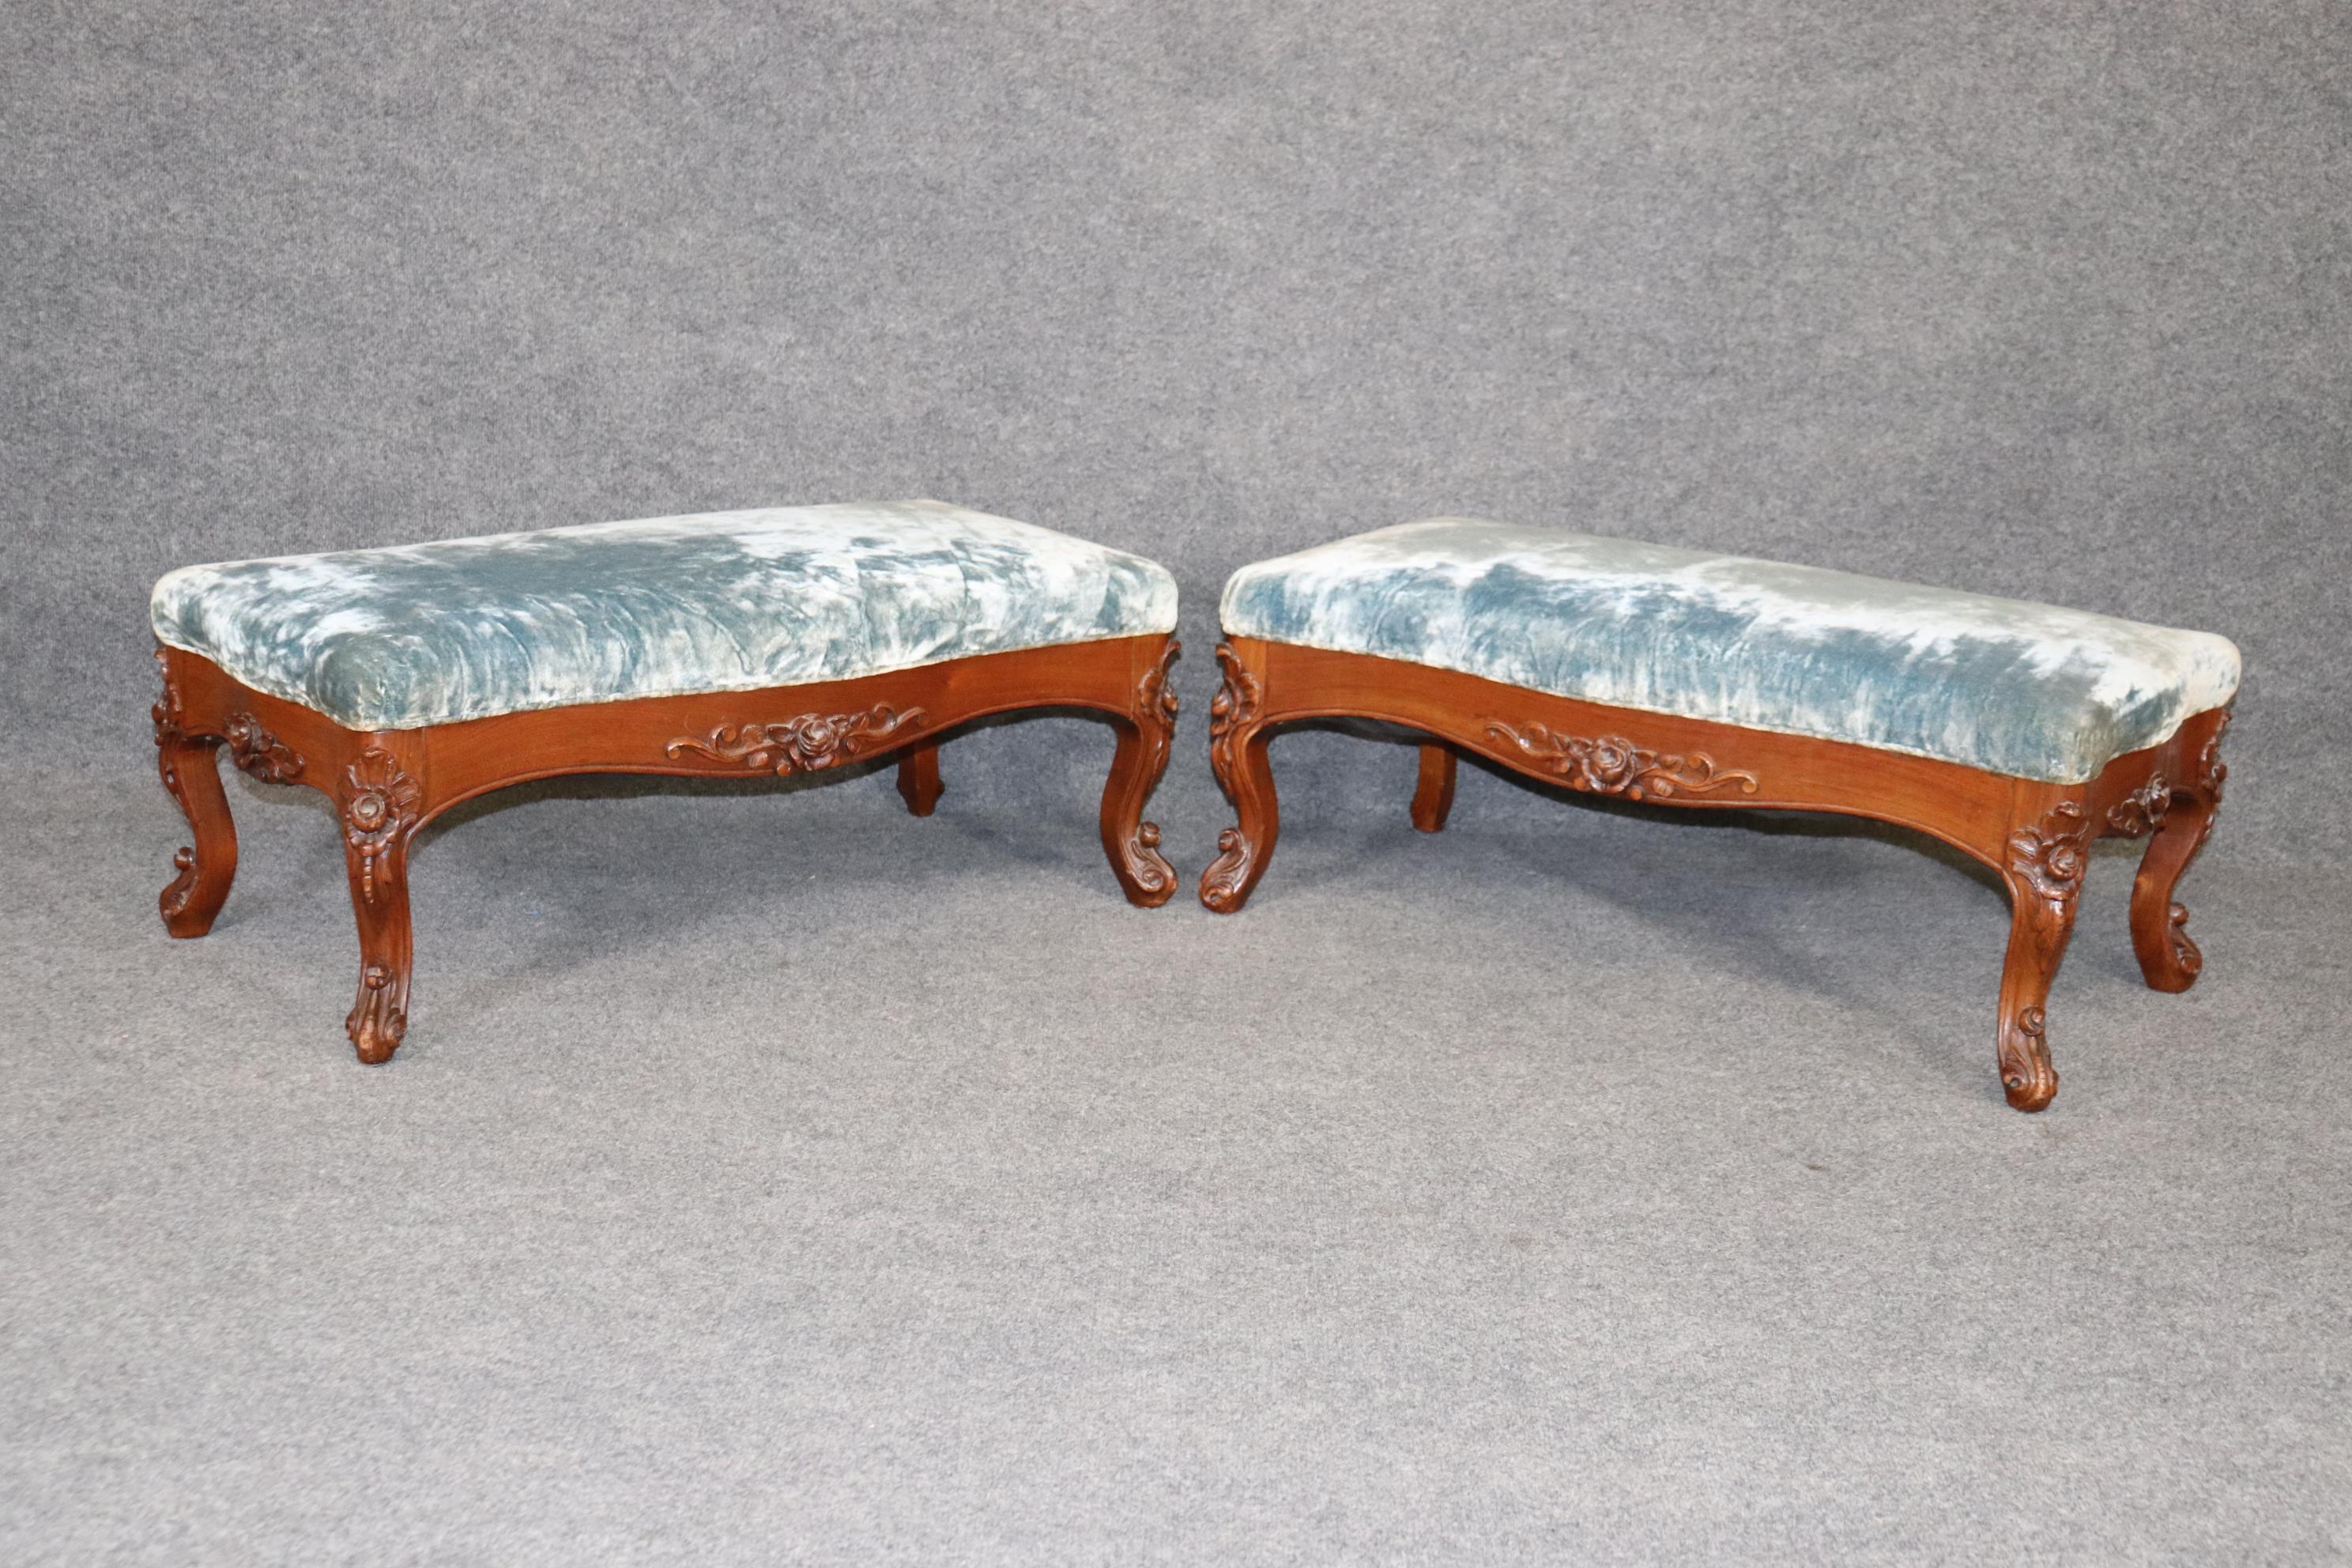 High Victorian Pair of Rare Walnut American Victorian Foot Stools Attributed to Belter  For Sale